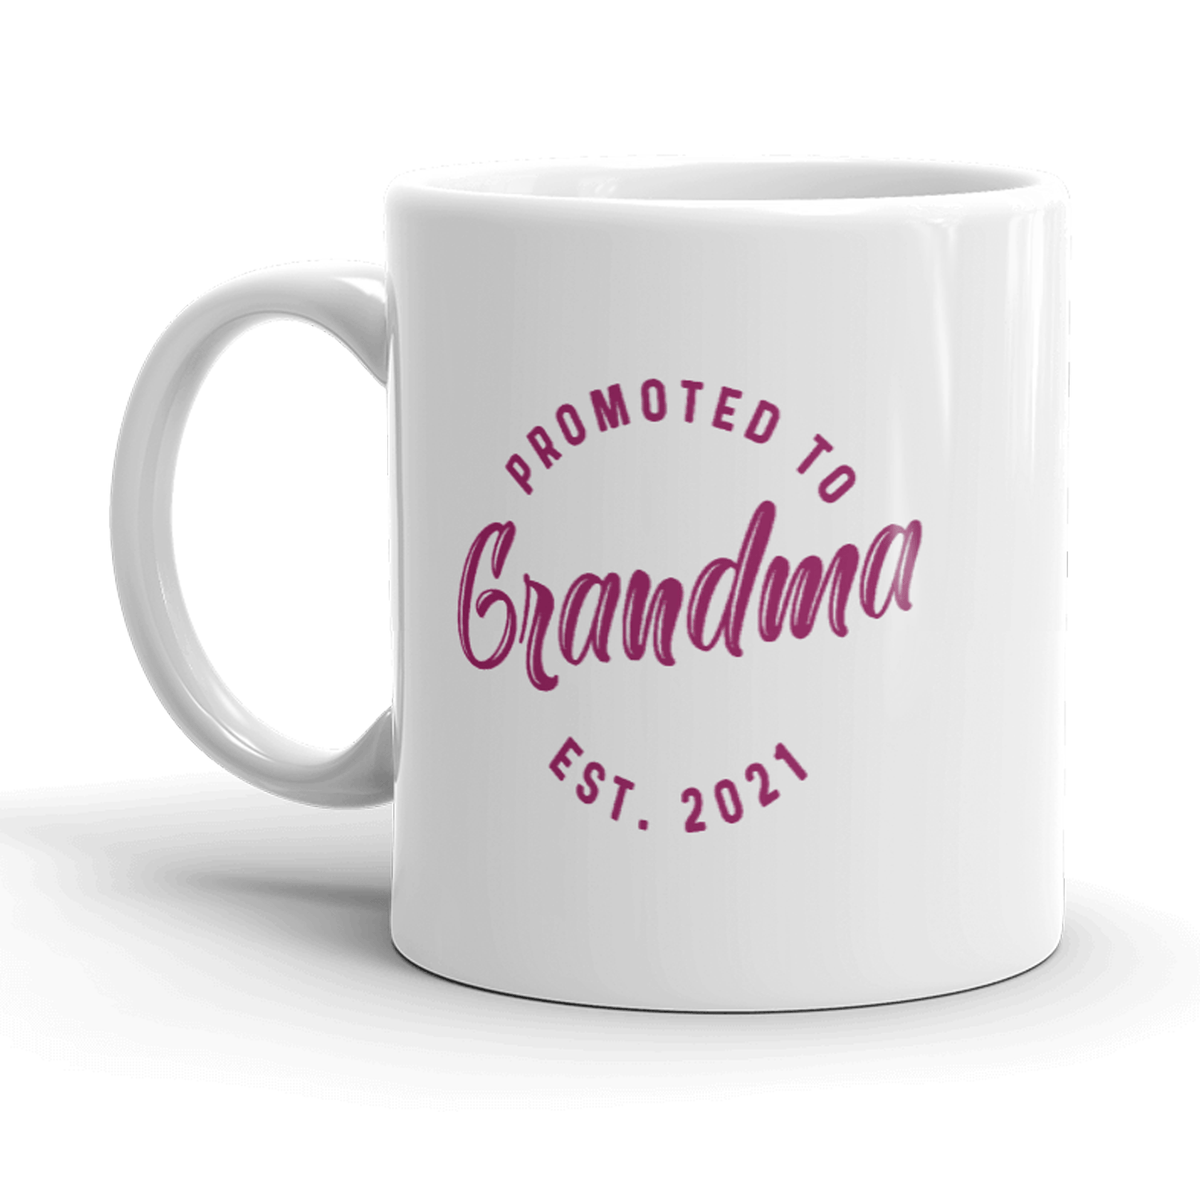 Promoted To Grandma 2021 Mug Funny New Baby Family Graphic Coffee Cup-11oz - Crazy Dog T-Shirts